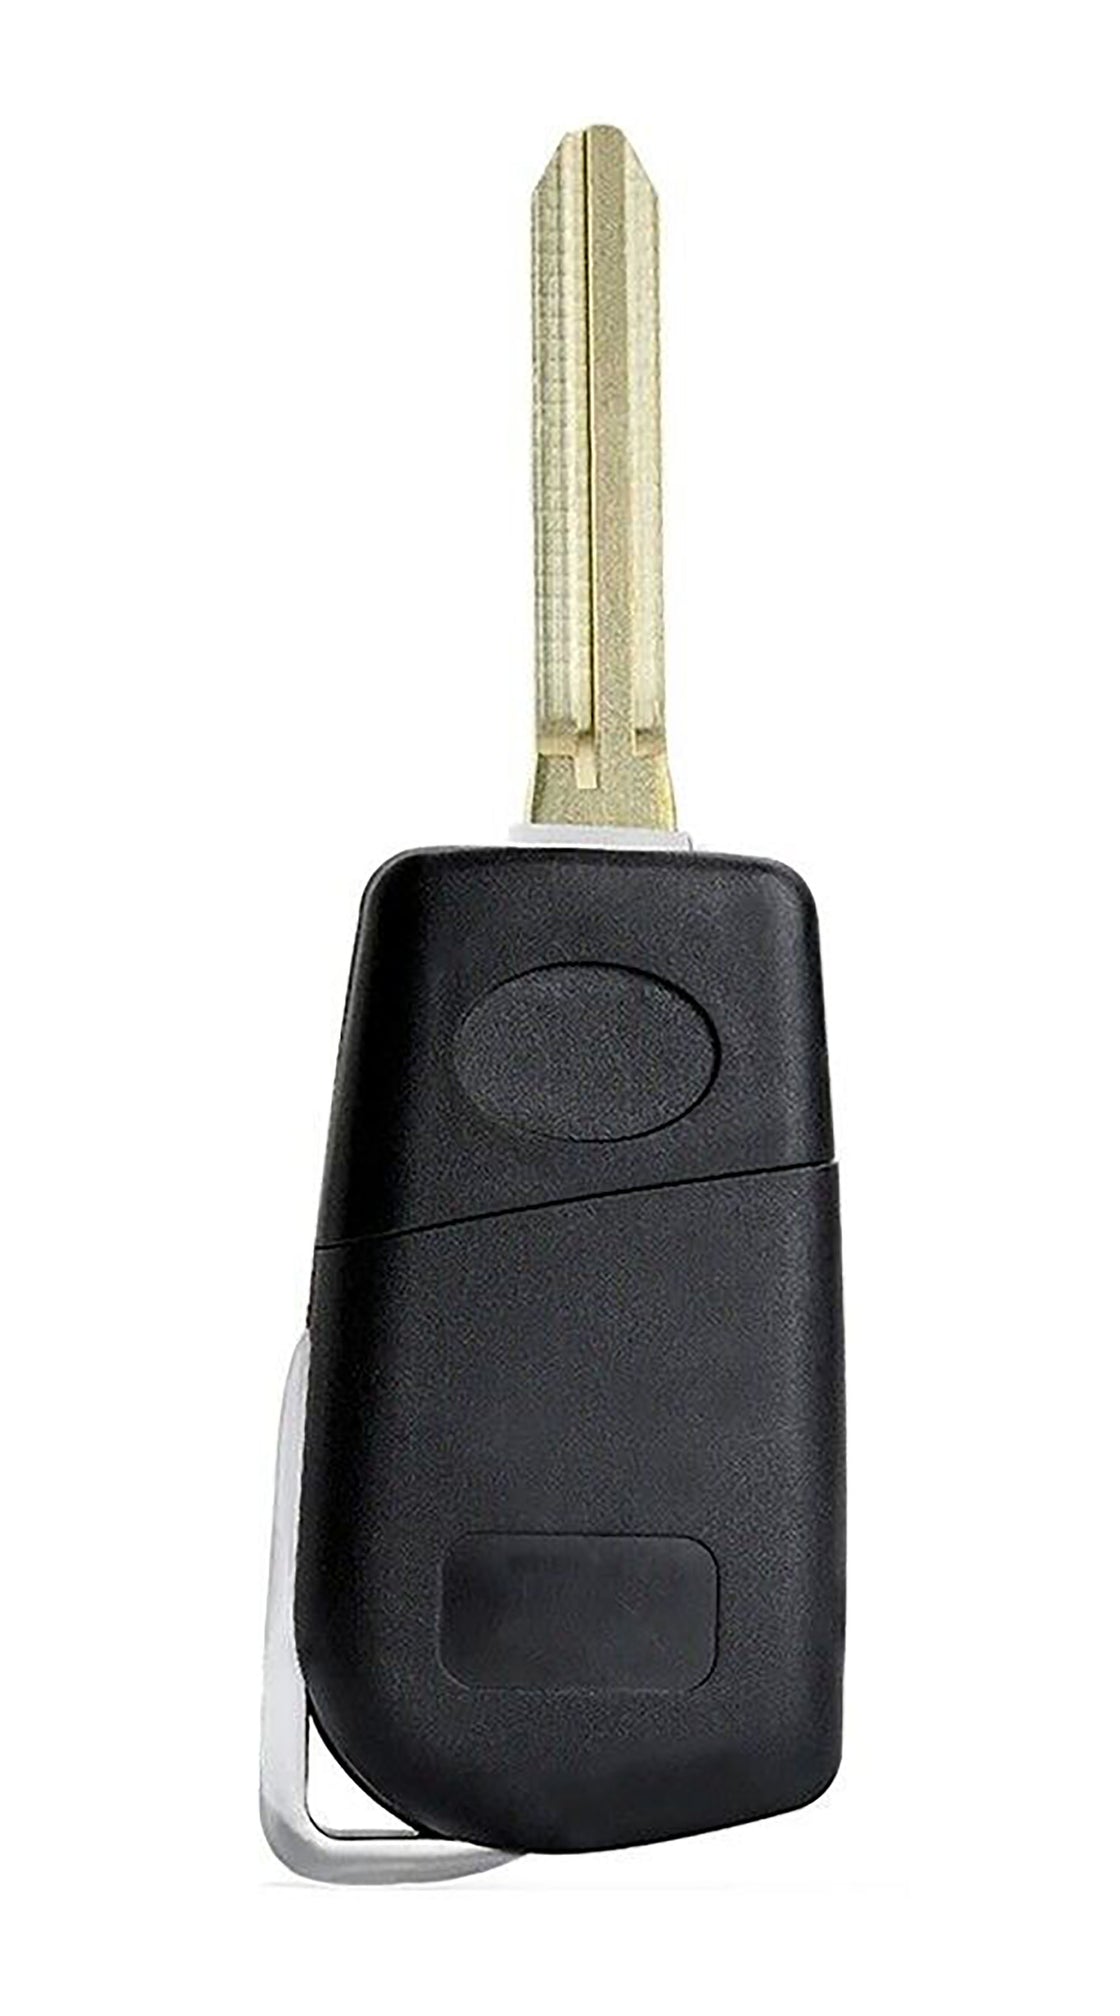 1x New Replacement Key Fob Compatible with & Fit For Toyota GQ4-29T dot Chip -Read Description - MPN GQ4-29T-M-06